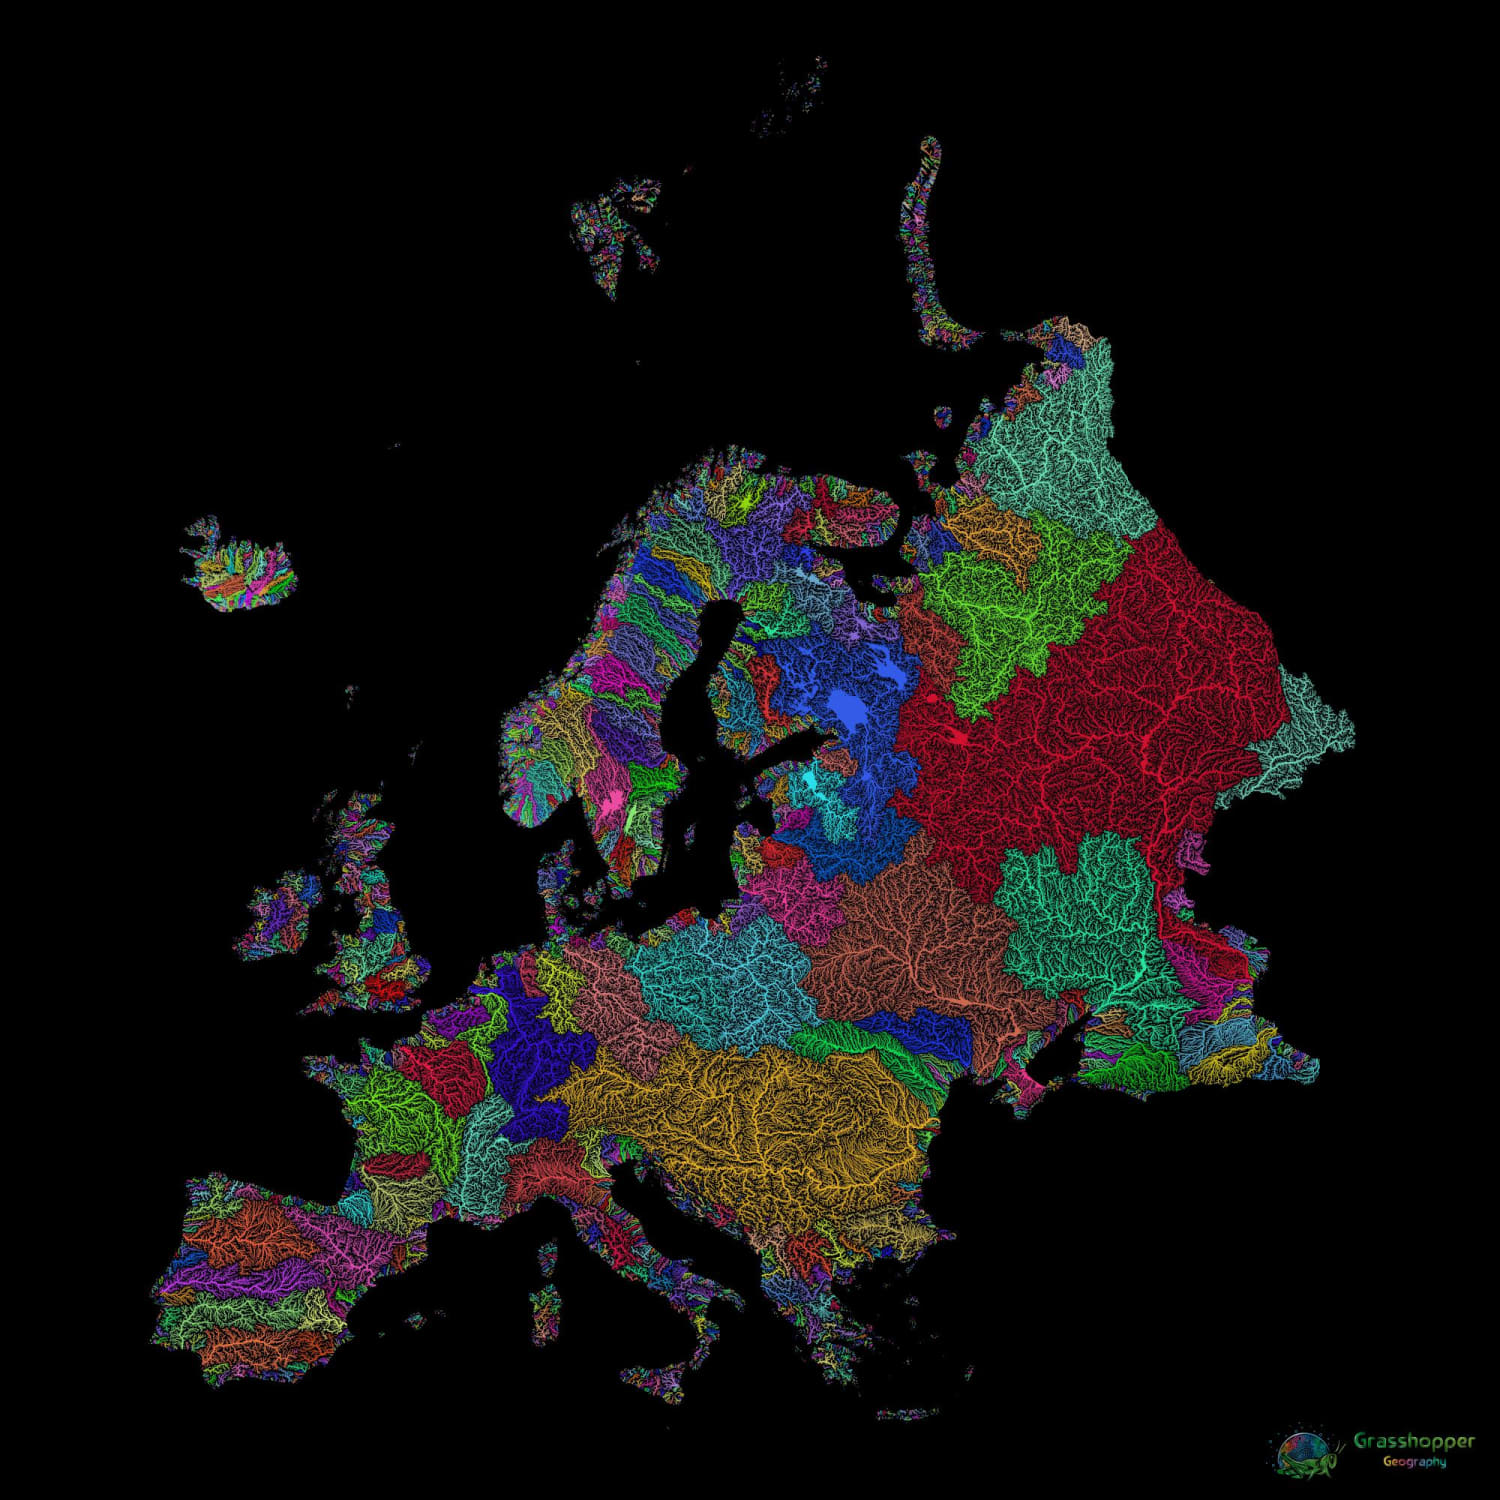 River basin map of the Europe